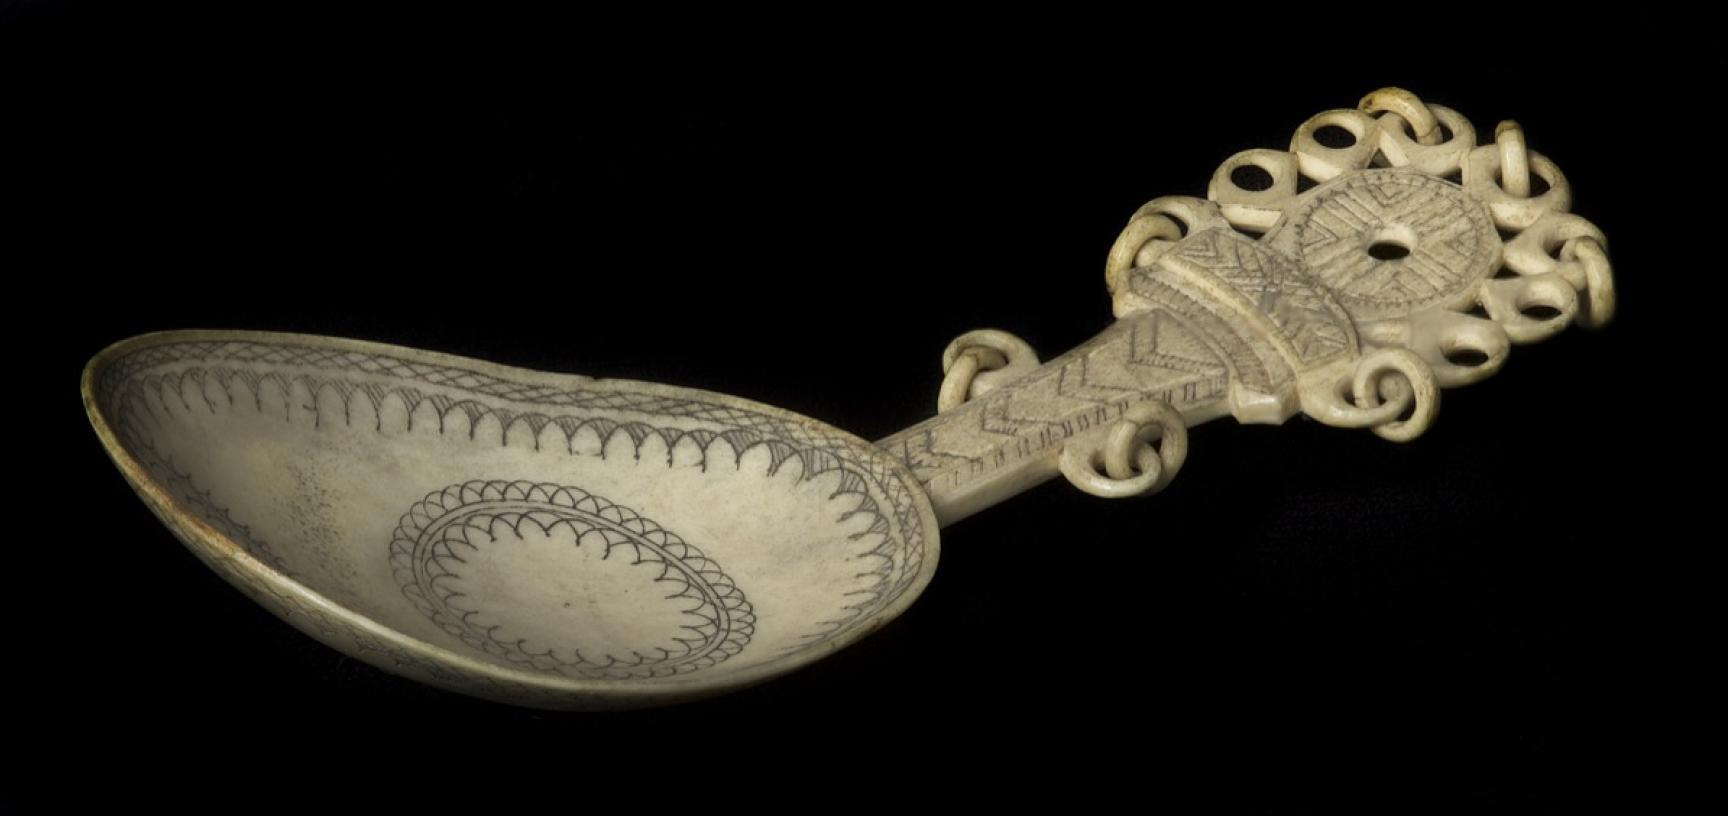 Spoon made of reindeer antler carved with Saami decorations, one of eleven similar spoons collected by Arthur Evans and donated to the Pitt Rivers Museum by Joan Evans in 1941. (Copyright Pitt Rivers Museum, University of Oxford. Accession Number: 1941.8.